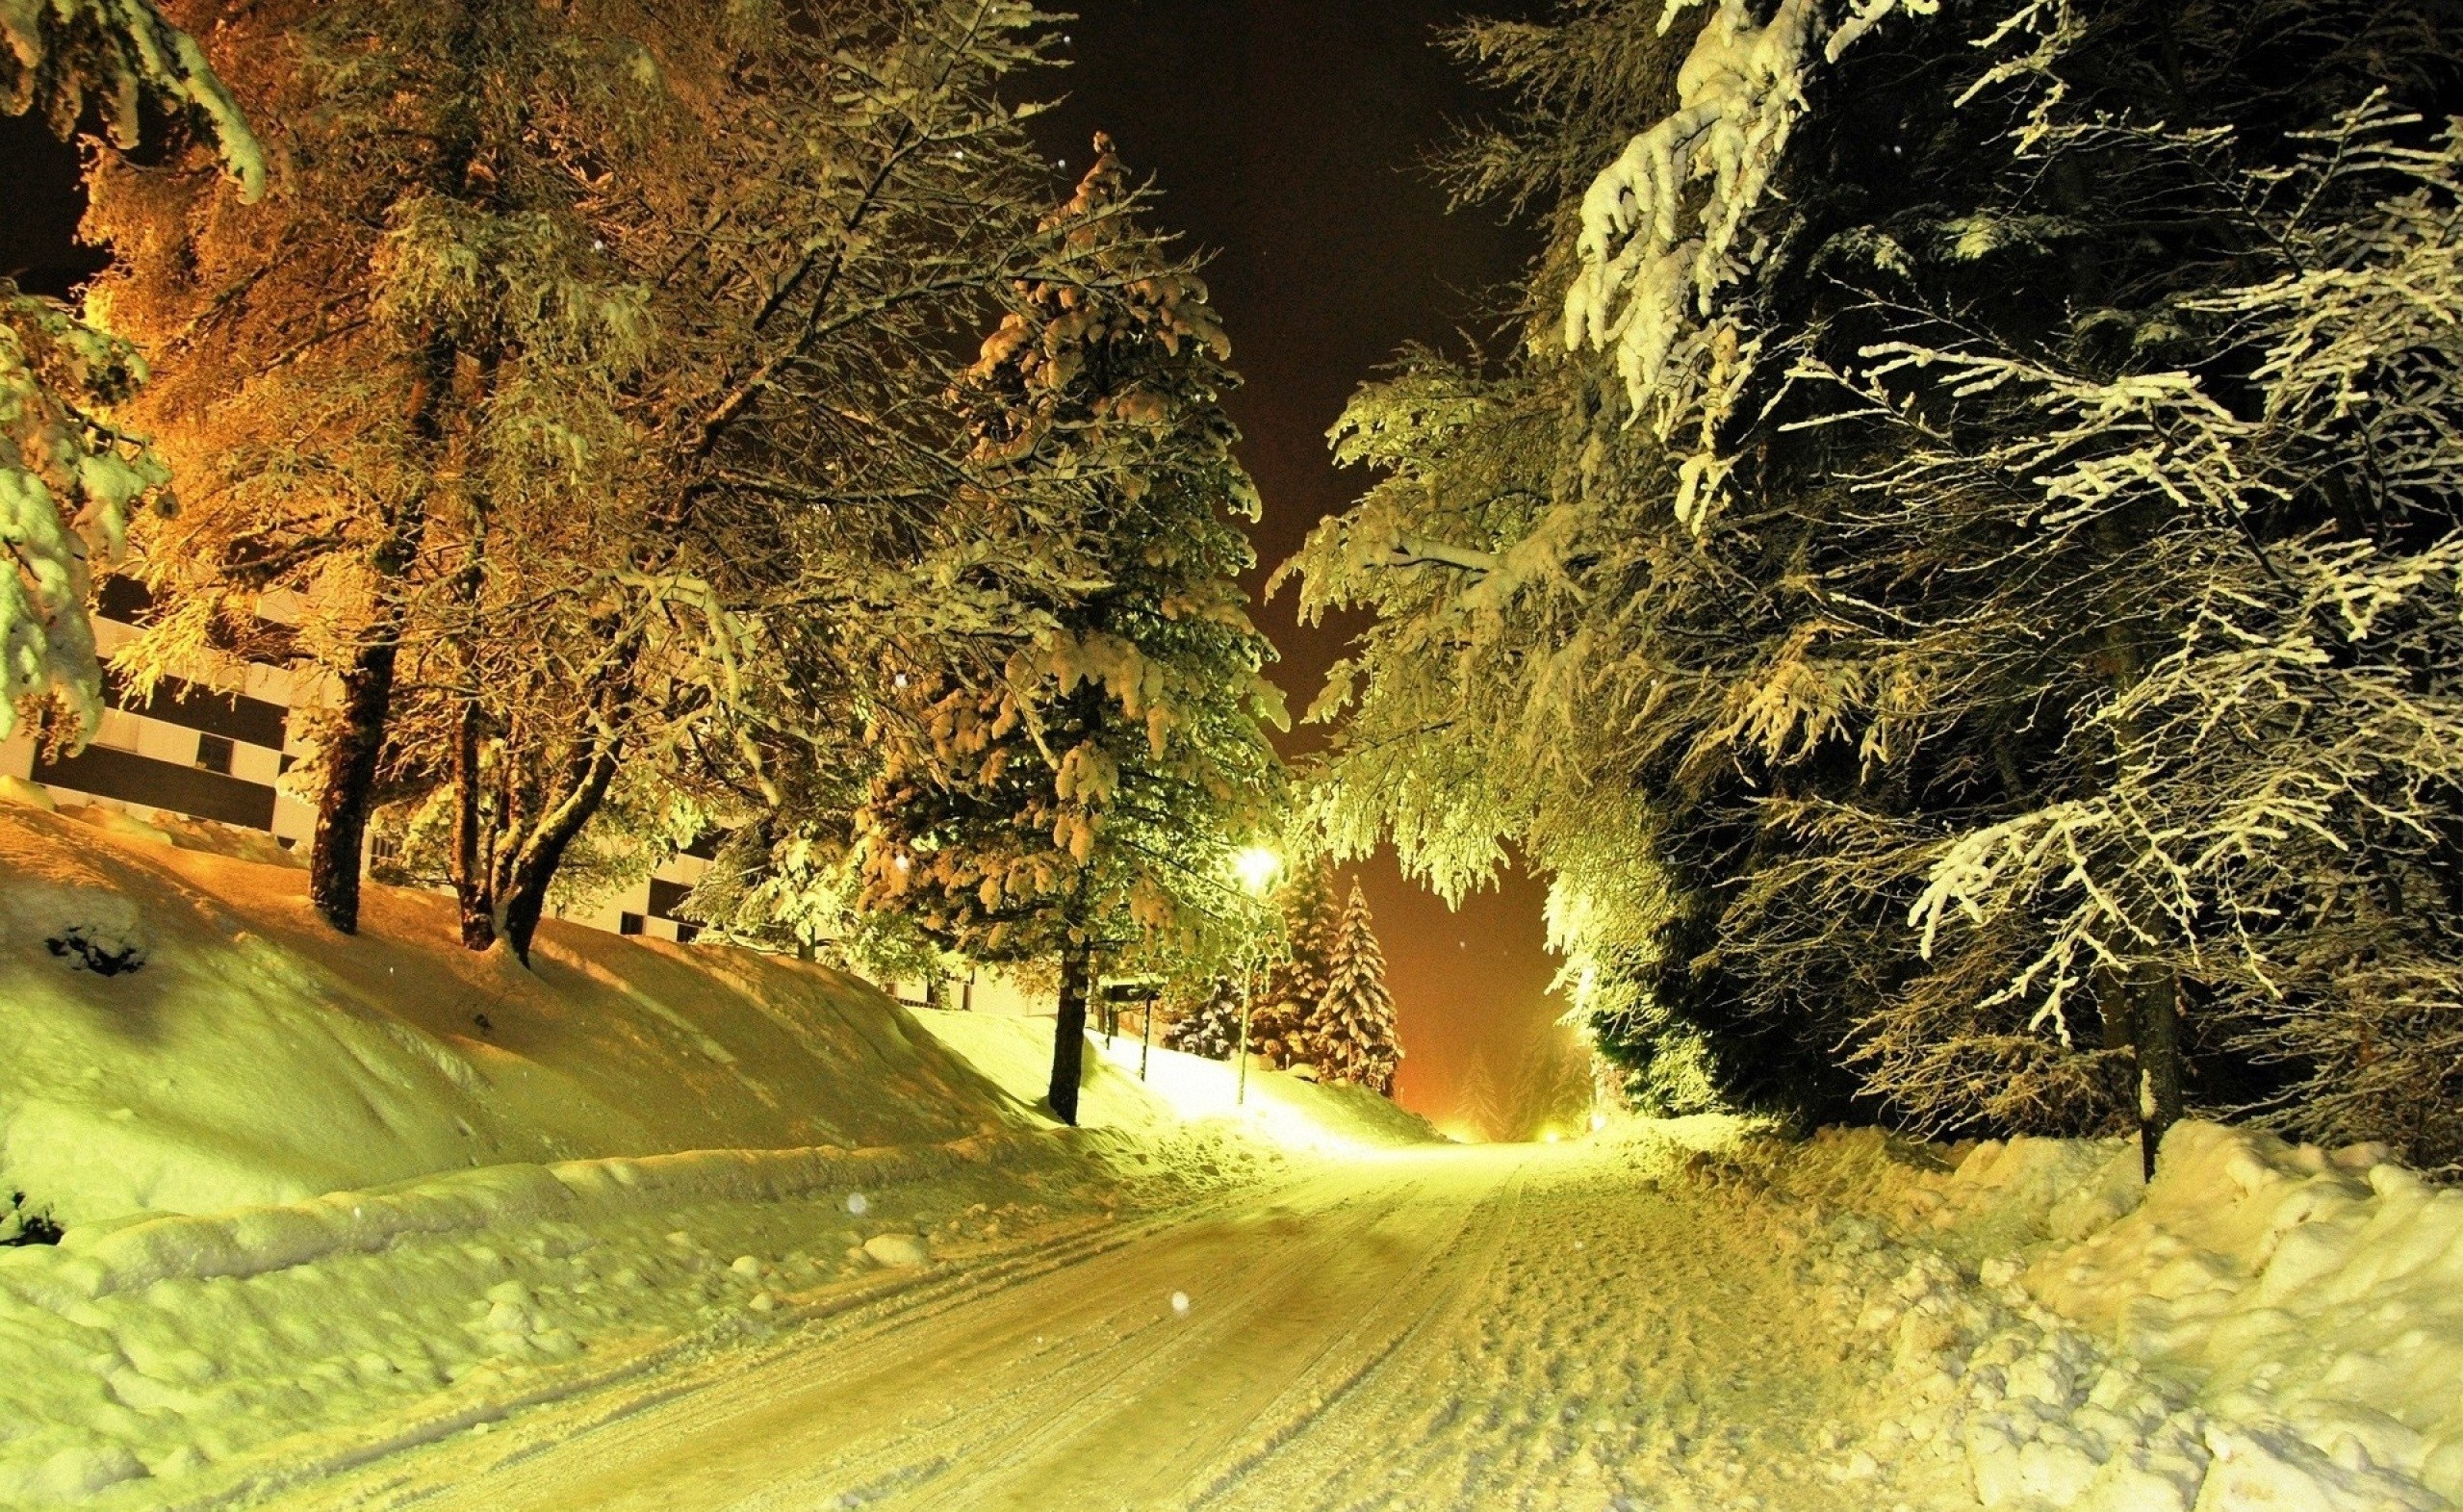 photography, Nature, Landscape, Winter, Trees, Night, Lights, Road, Snow Wallpaper